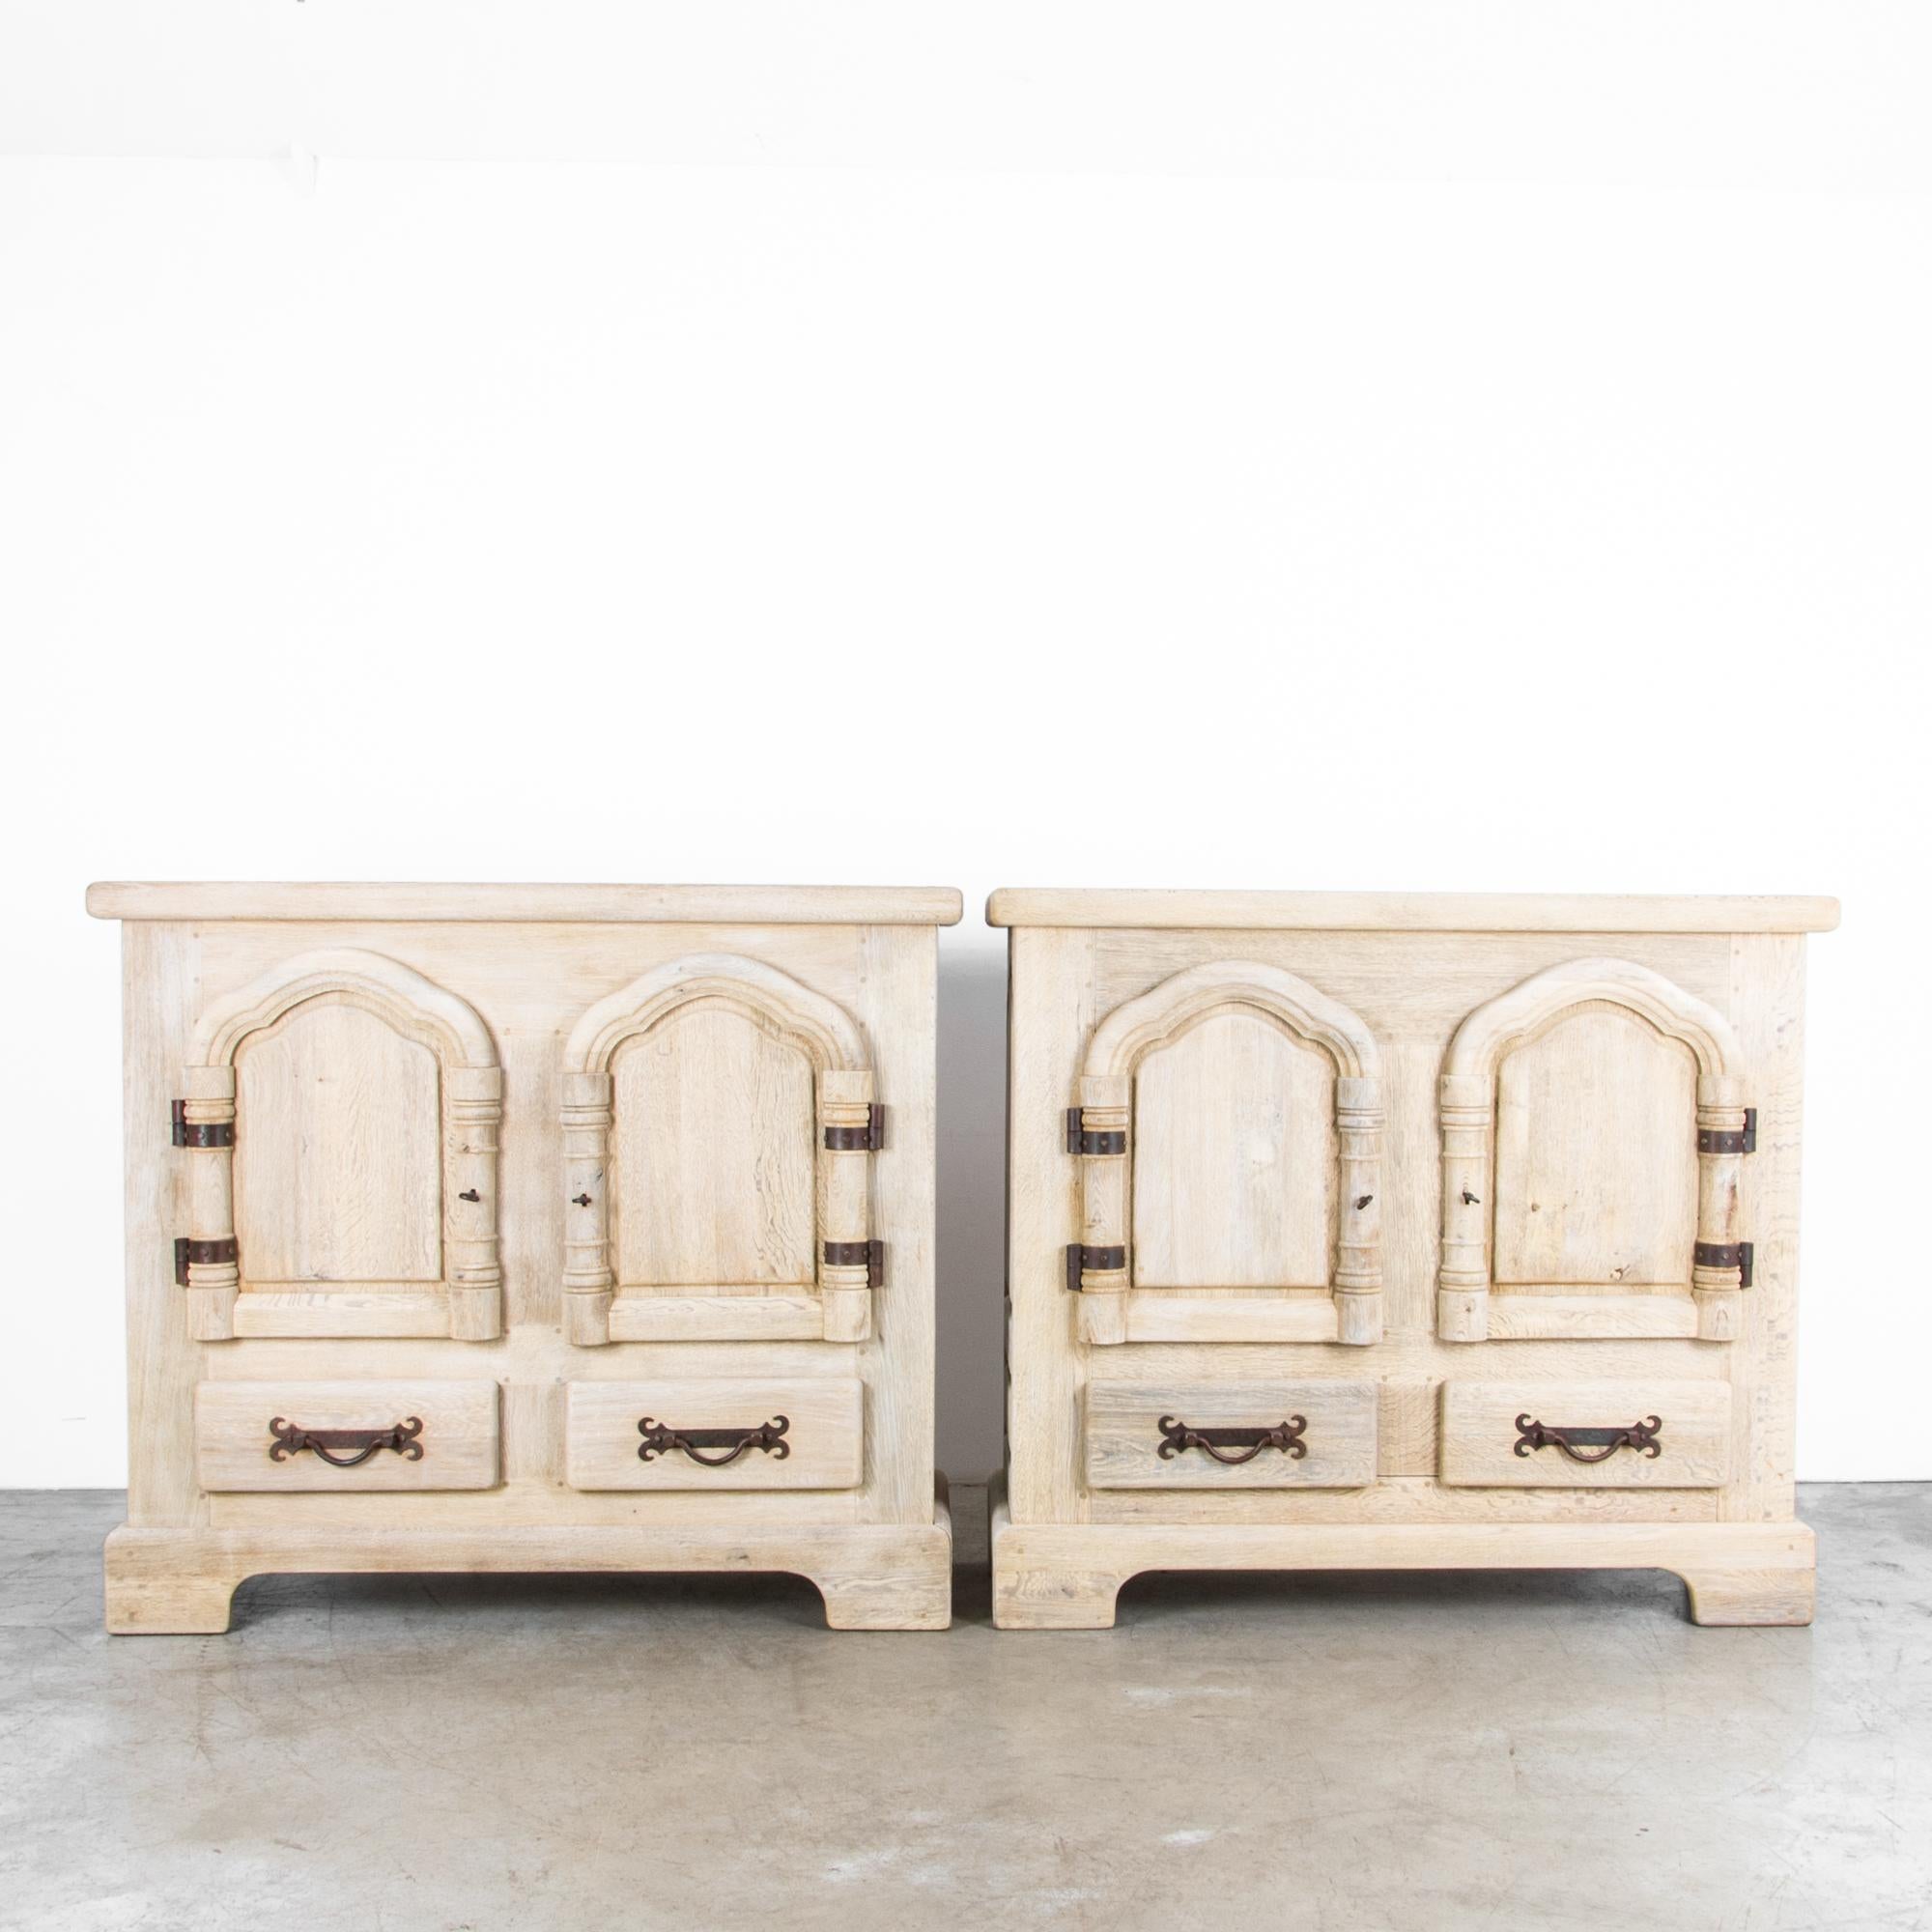 A pair of oak buffets from Belgium, circa 1950. Each cabinet features two doors and two lower drawers, with fixed interior shelves. A simple case is enlivened by the Gothic influenced arches of the doors and the decorative ironwork of the hinges and